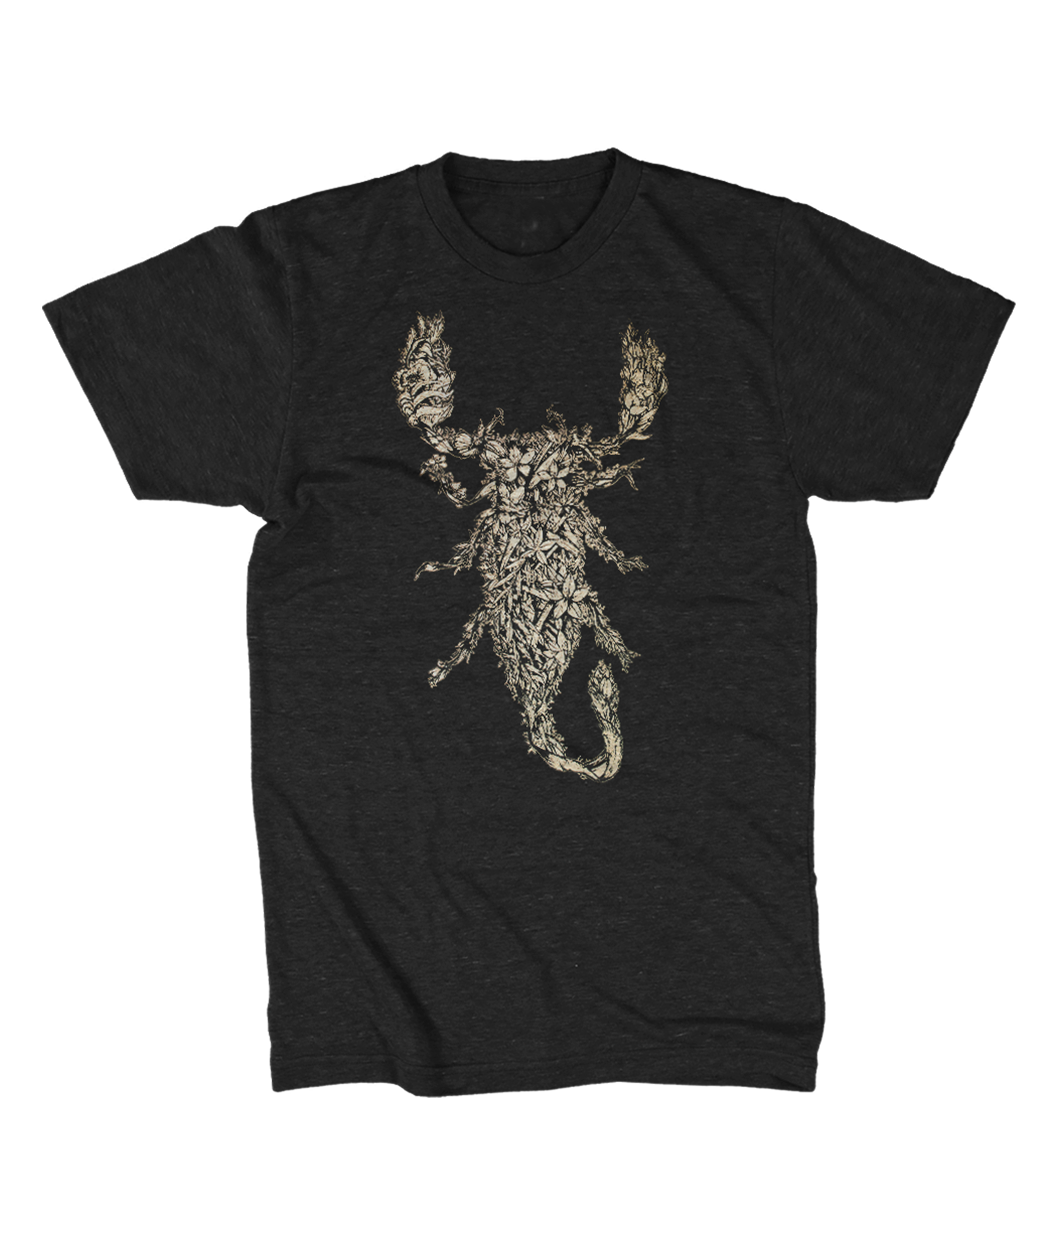 A dark gray shirt with white line drawn flowers arranged to make a scorpion in the center of the shirt - from Tyler Thrasher